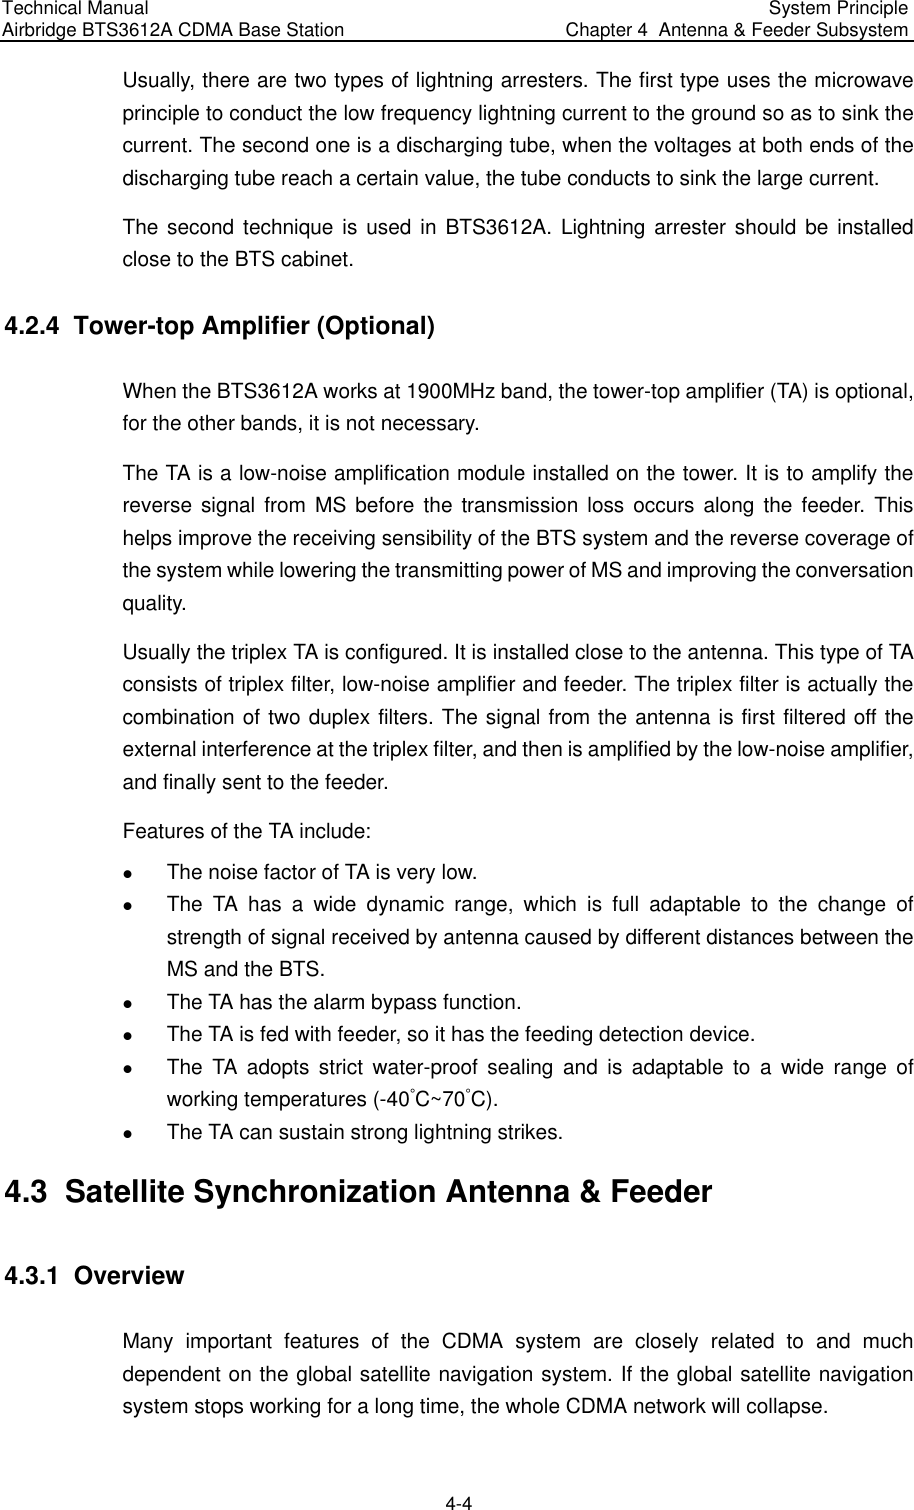 Technical Manual  Airbridge BTS3612A CDMA Base Station  System Principle  Chapter 4  Antenna &amp; Feeder Subsystem  4-4 Usually, there are two types of lightning arresters. The first type uses the microwave principle to conduct the low frequency lightning current to the ground so as to sink the current. The second one is a discharging tube, when the voltages at both ends of the discharging tube reach a certain value, the tube conducts to sink the large current.  The second technique is used in BTS3612A. Lightning arrester should be installed close to the BTS cabinet. 4.2.4  Tower-top Amplifier (Optional) When the BTS3612A works at 1900MHz band, the tower-top amplifier (TA) is optional, for the other bands, it is not necessary. The TA is a low-noise amplification module installed on the tower. It is to amplify the reverse signal from MS before the transmission loss occurs along the feeder. This helps improve the receiving sensibility of the BTS system and the reverse coverage of the system while lowering the transmitting power of MS and improving the conversation quality. Usually the triplex TA is configured. It is installed close to the antenna. This type of TA consists of triplex filter, low-noise amplifier and feeder. The triplex filter is actually the combination of two duplex filters. The signal from the antenna is first filtered off the external interference at the triplex filter, and then is amplified by the low-noise amplifier, and finally sent to the feeder. Features of the TA include: z The noise factor of TA is very low. z The TA has a wide dynamic range, which is full adaptable to the change of strength of signal received by antenna caused by different distances between the MS and the BTS. z The TA has the alarm bypass function. z The TA is fed with feeder, so it has the feeding detection device. z The TA adopts strict water-proof sealing and is adaptable to a wide range of working temperatures (-40ÿC~70ÿC). z The TA can sustain strong lightning strikes. 4.3  Satellite Synchronization Antenna &amp; Feeder 4.3.1  Overview Many important features of the CDMA system are closely related to and much dependent on the global satellite navigation system. If the global satellite navigation system stops working for a long time, the whole CDMA network will collapse.  